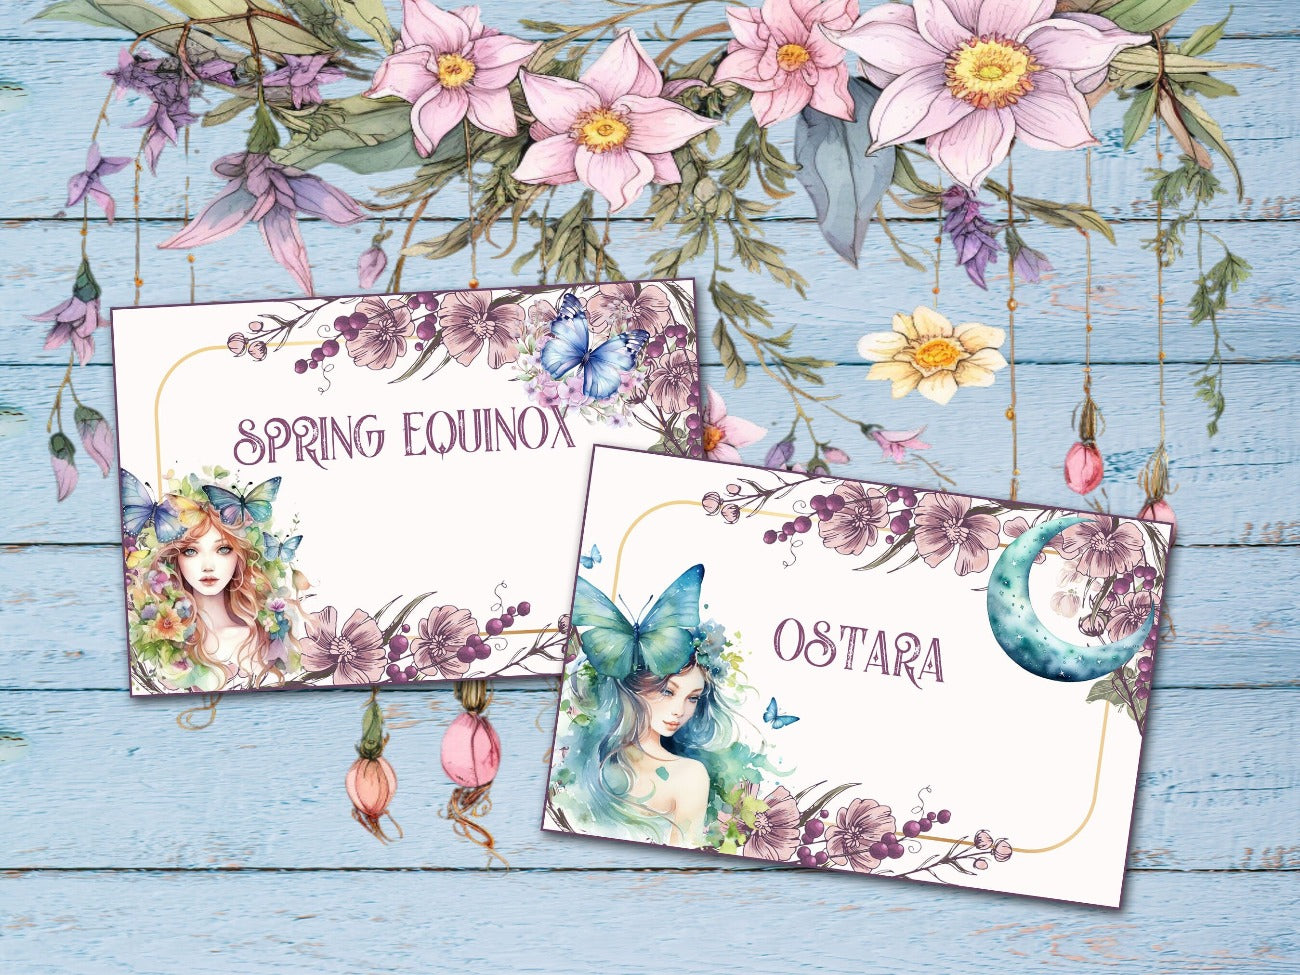 OSTARA LABELS, Closeup view of Spring Equinox and Ostara labels with fanciful text, featuring two pastel butterfly goddesses, and a crescent moon - Morgana Magick Spell